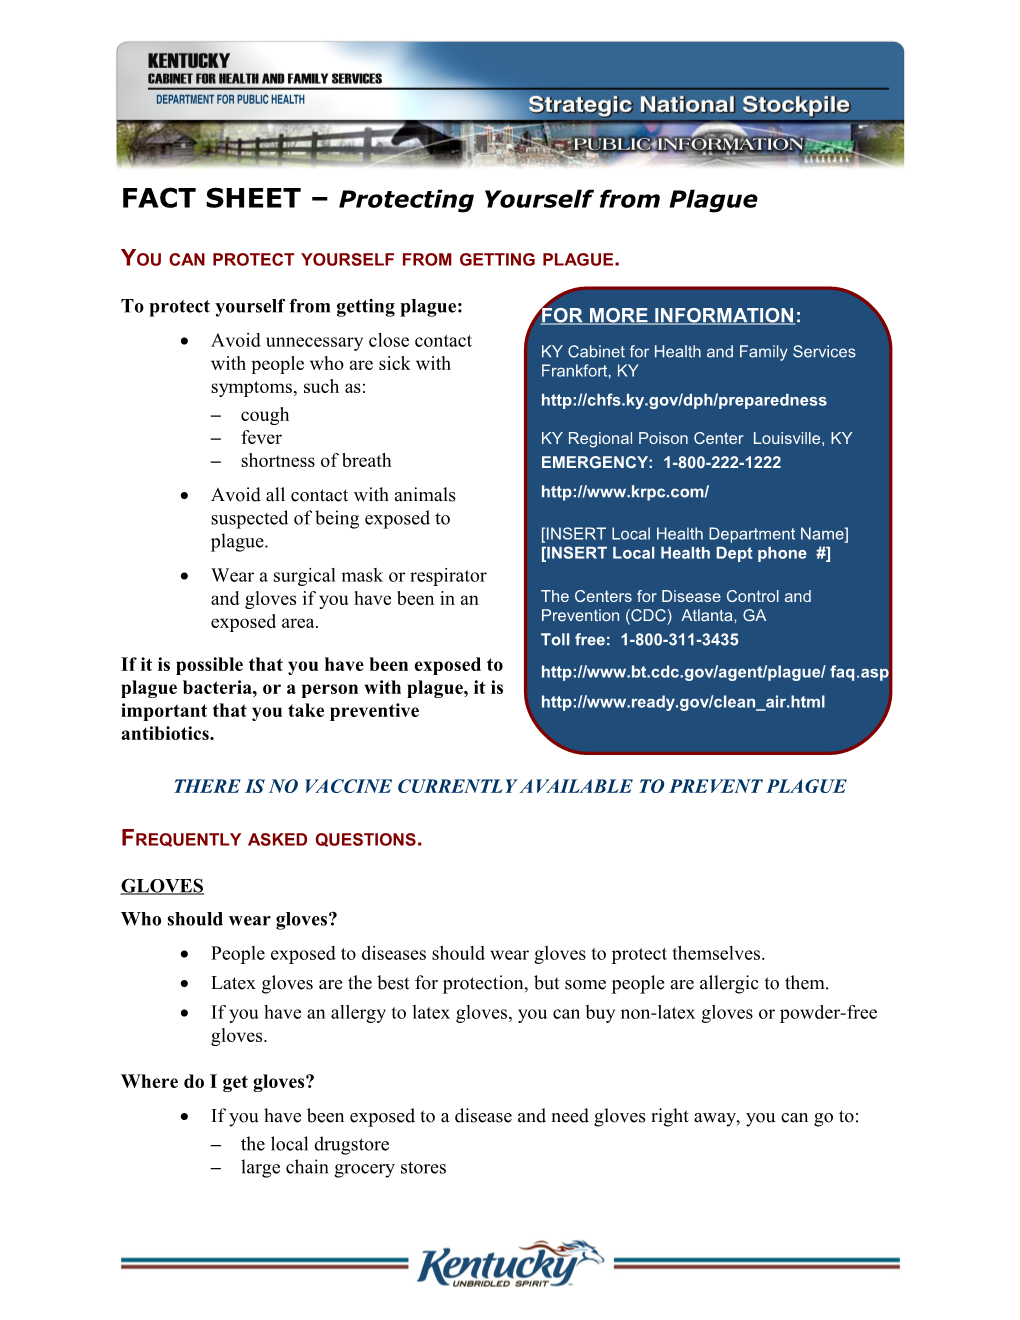 FACT SHEET Protecting Yourself from Plague